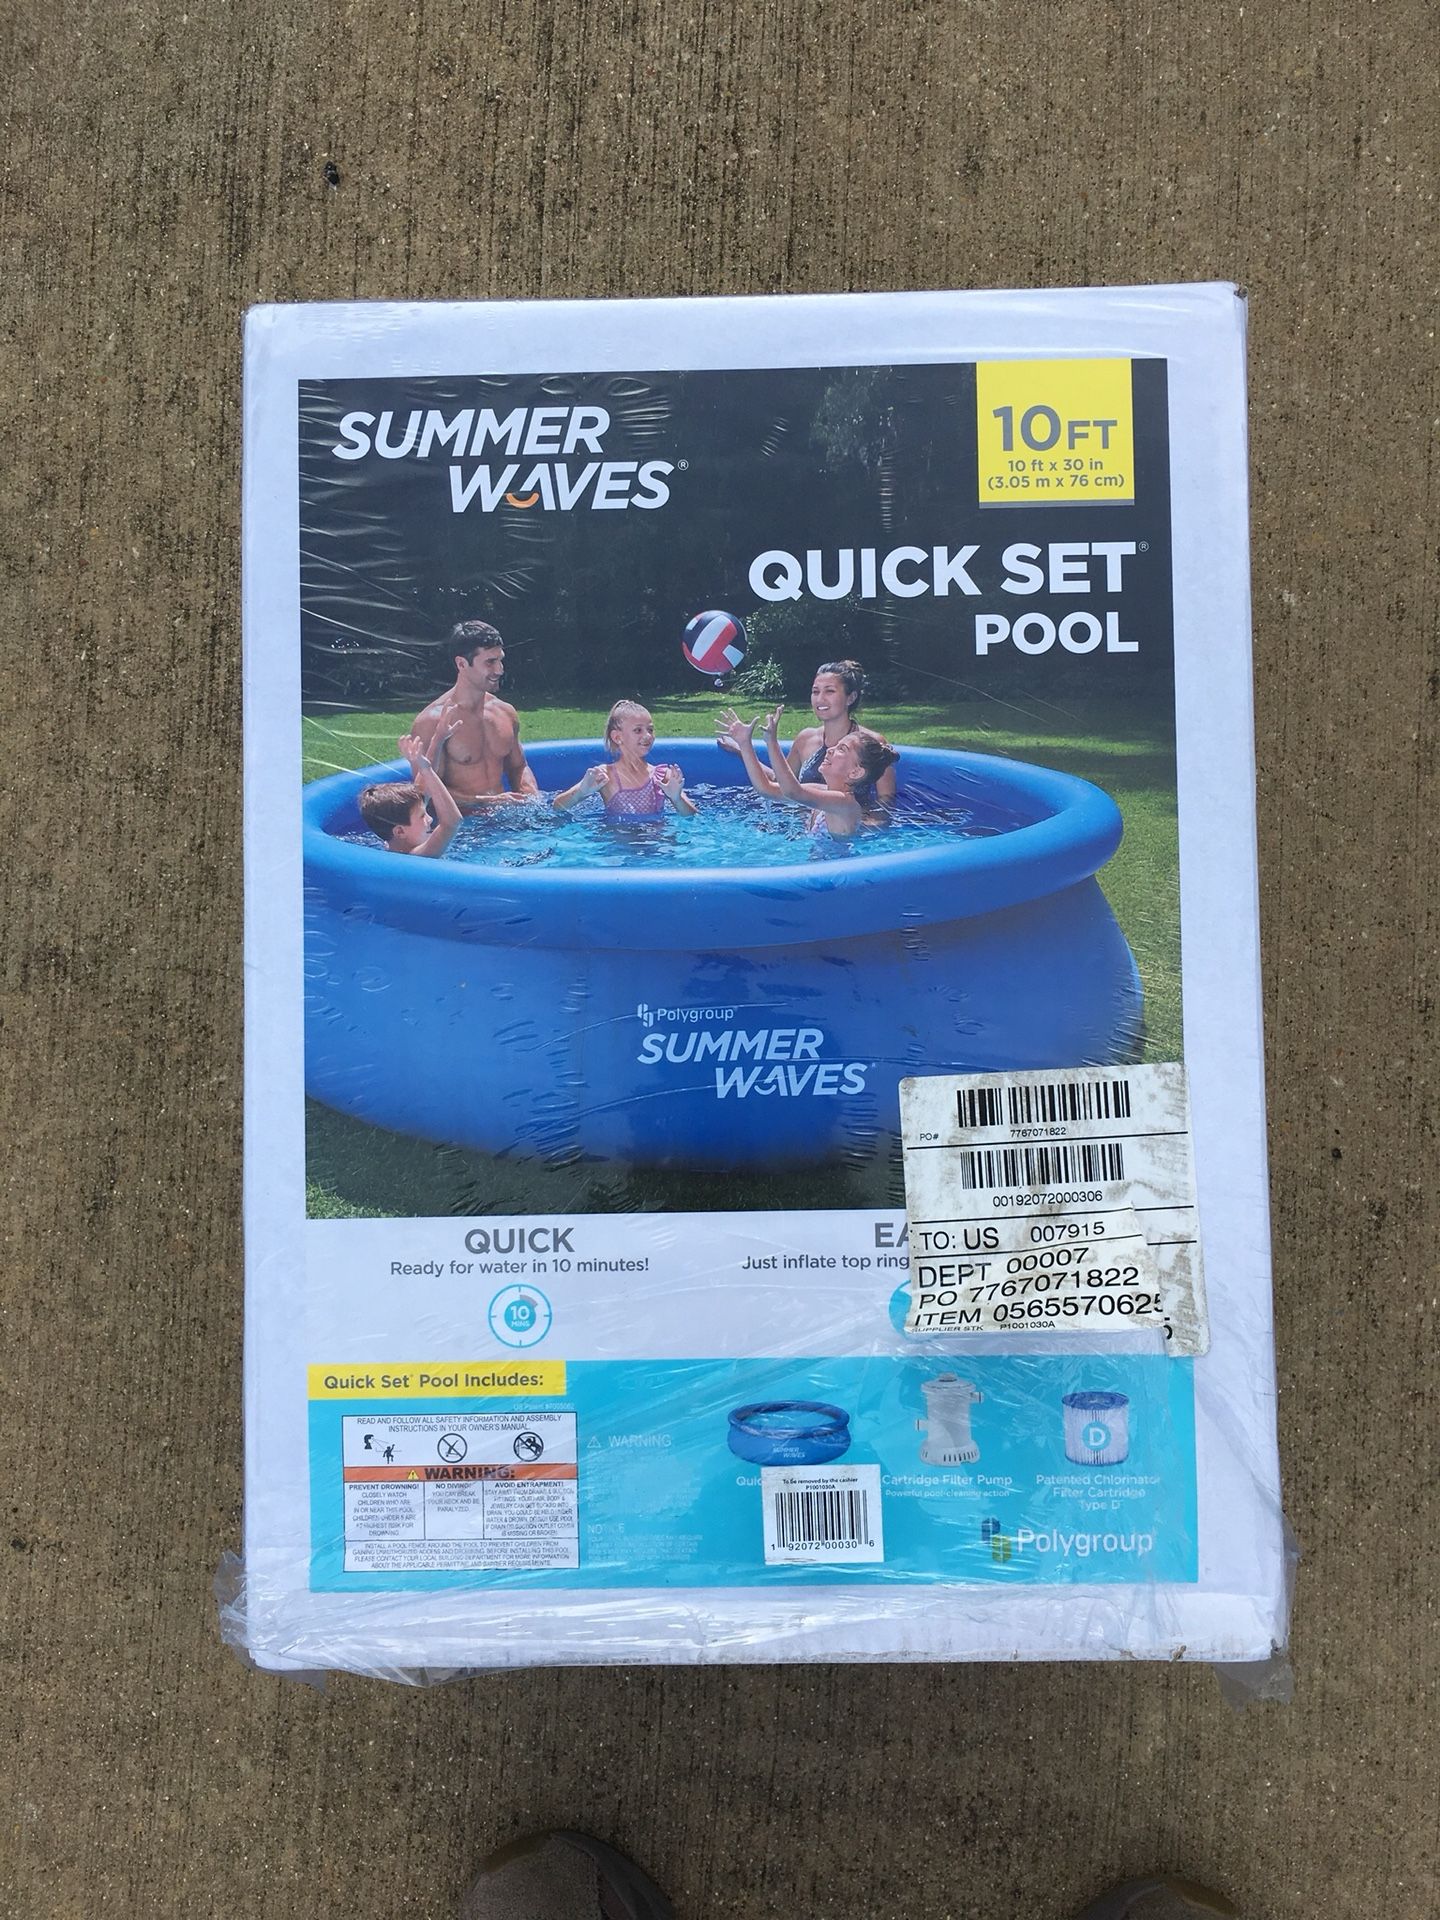 Brand New Summer Waves Quick set pool 10'x30"